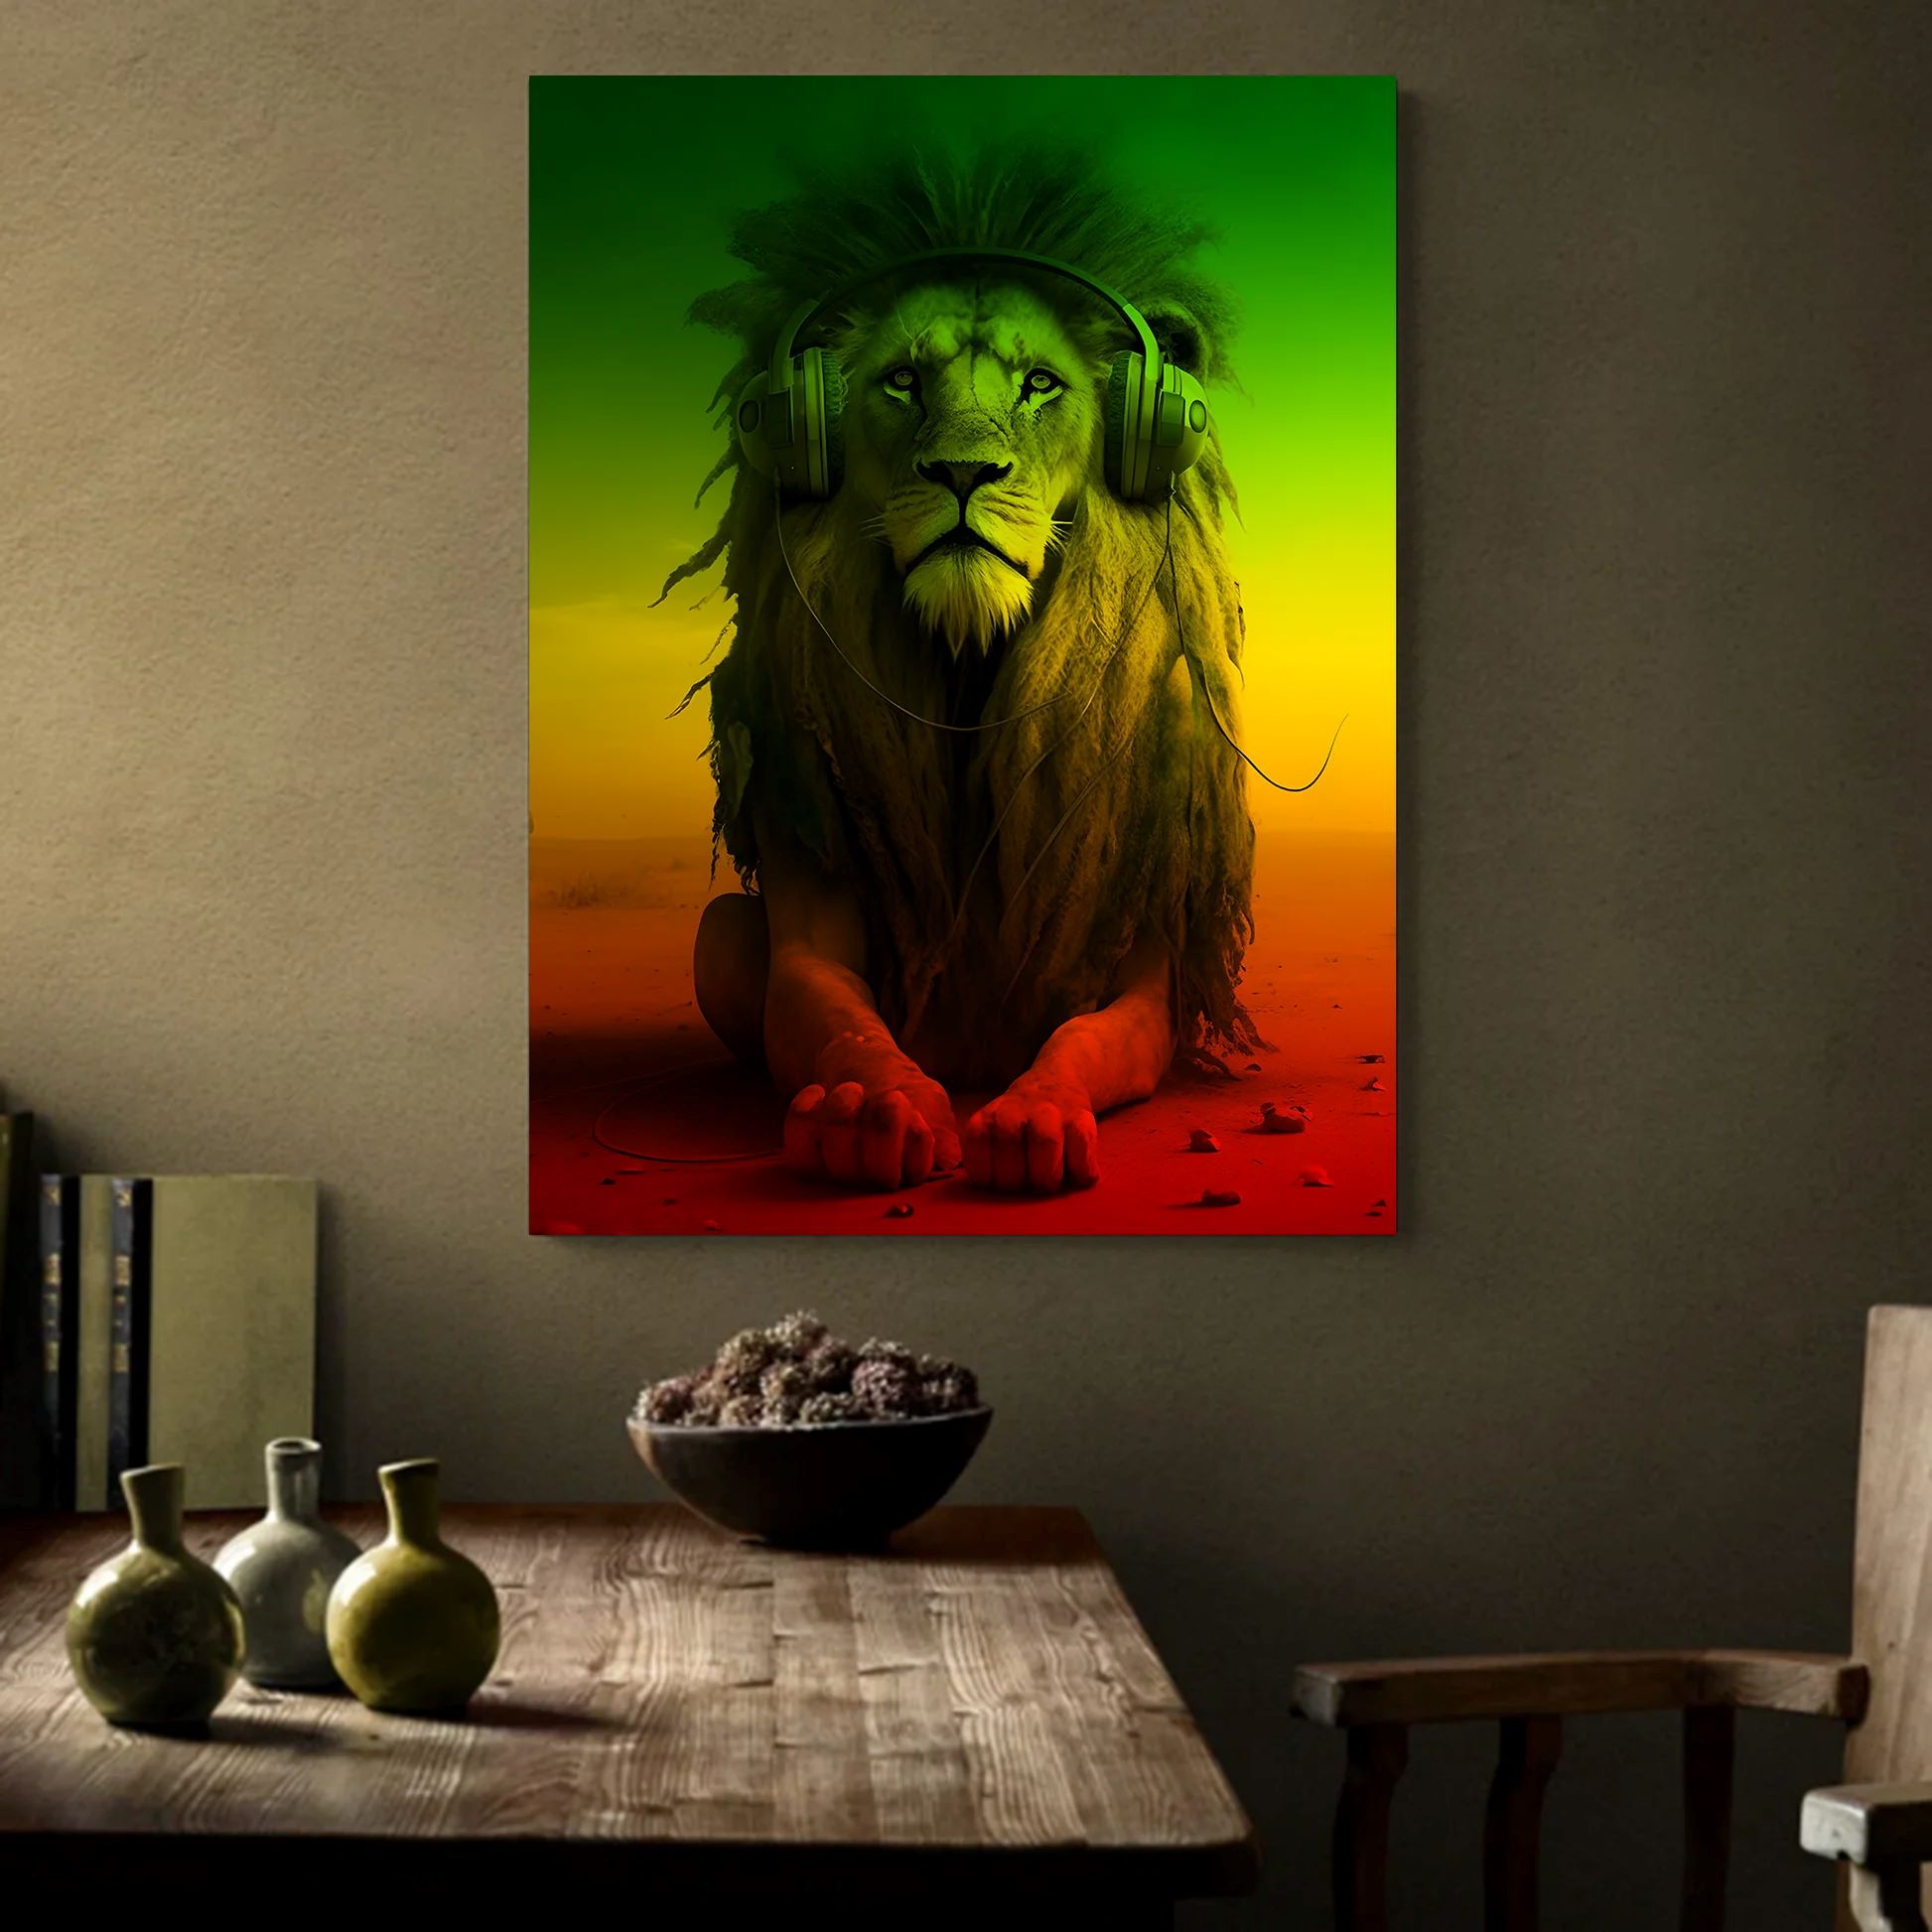 What Does The Lion Have To Do With Reggae?